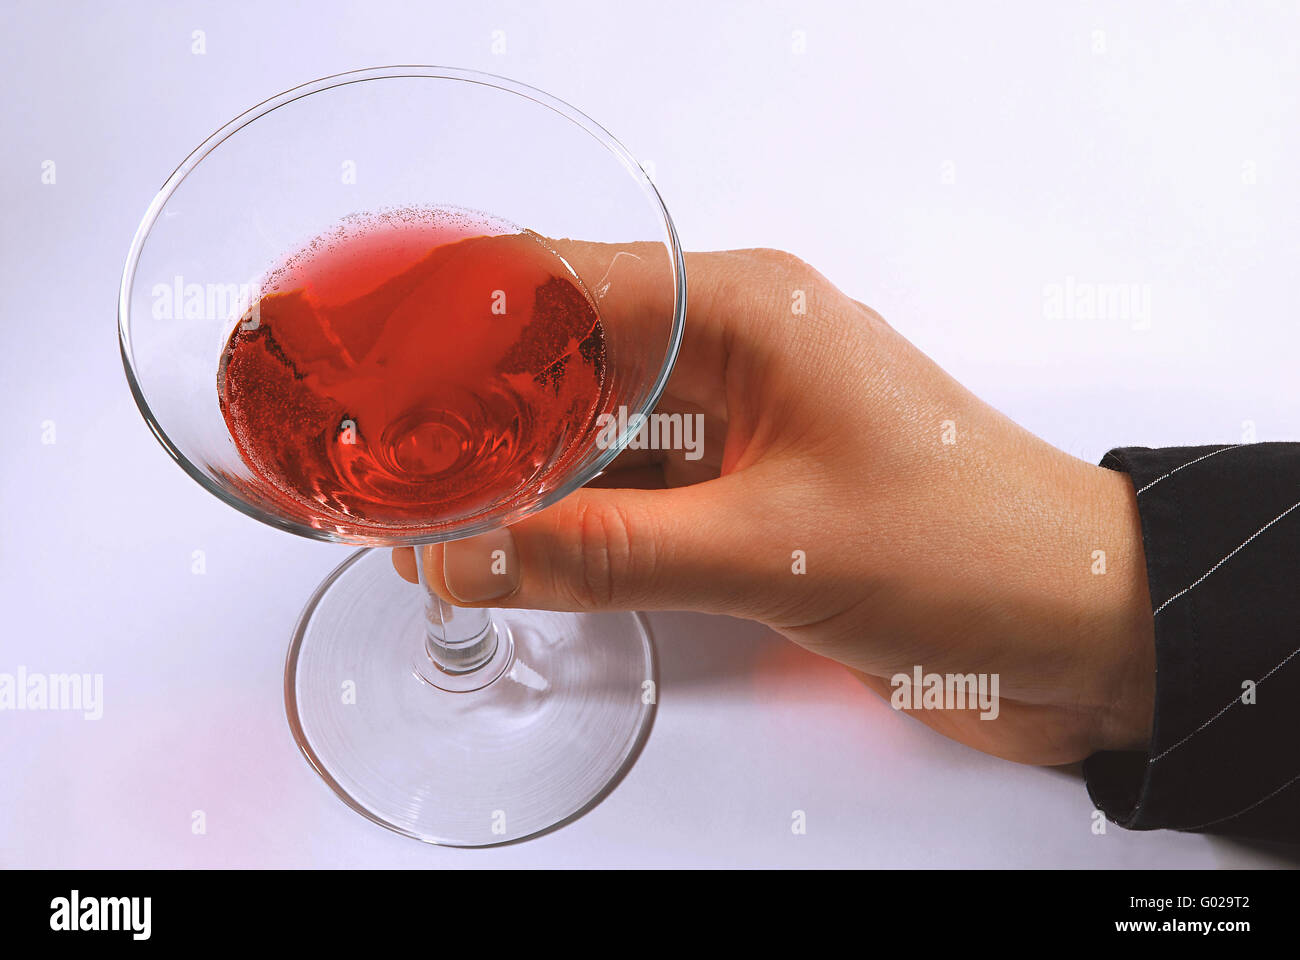 hand holding cocktail glass Stock Photo